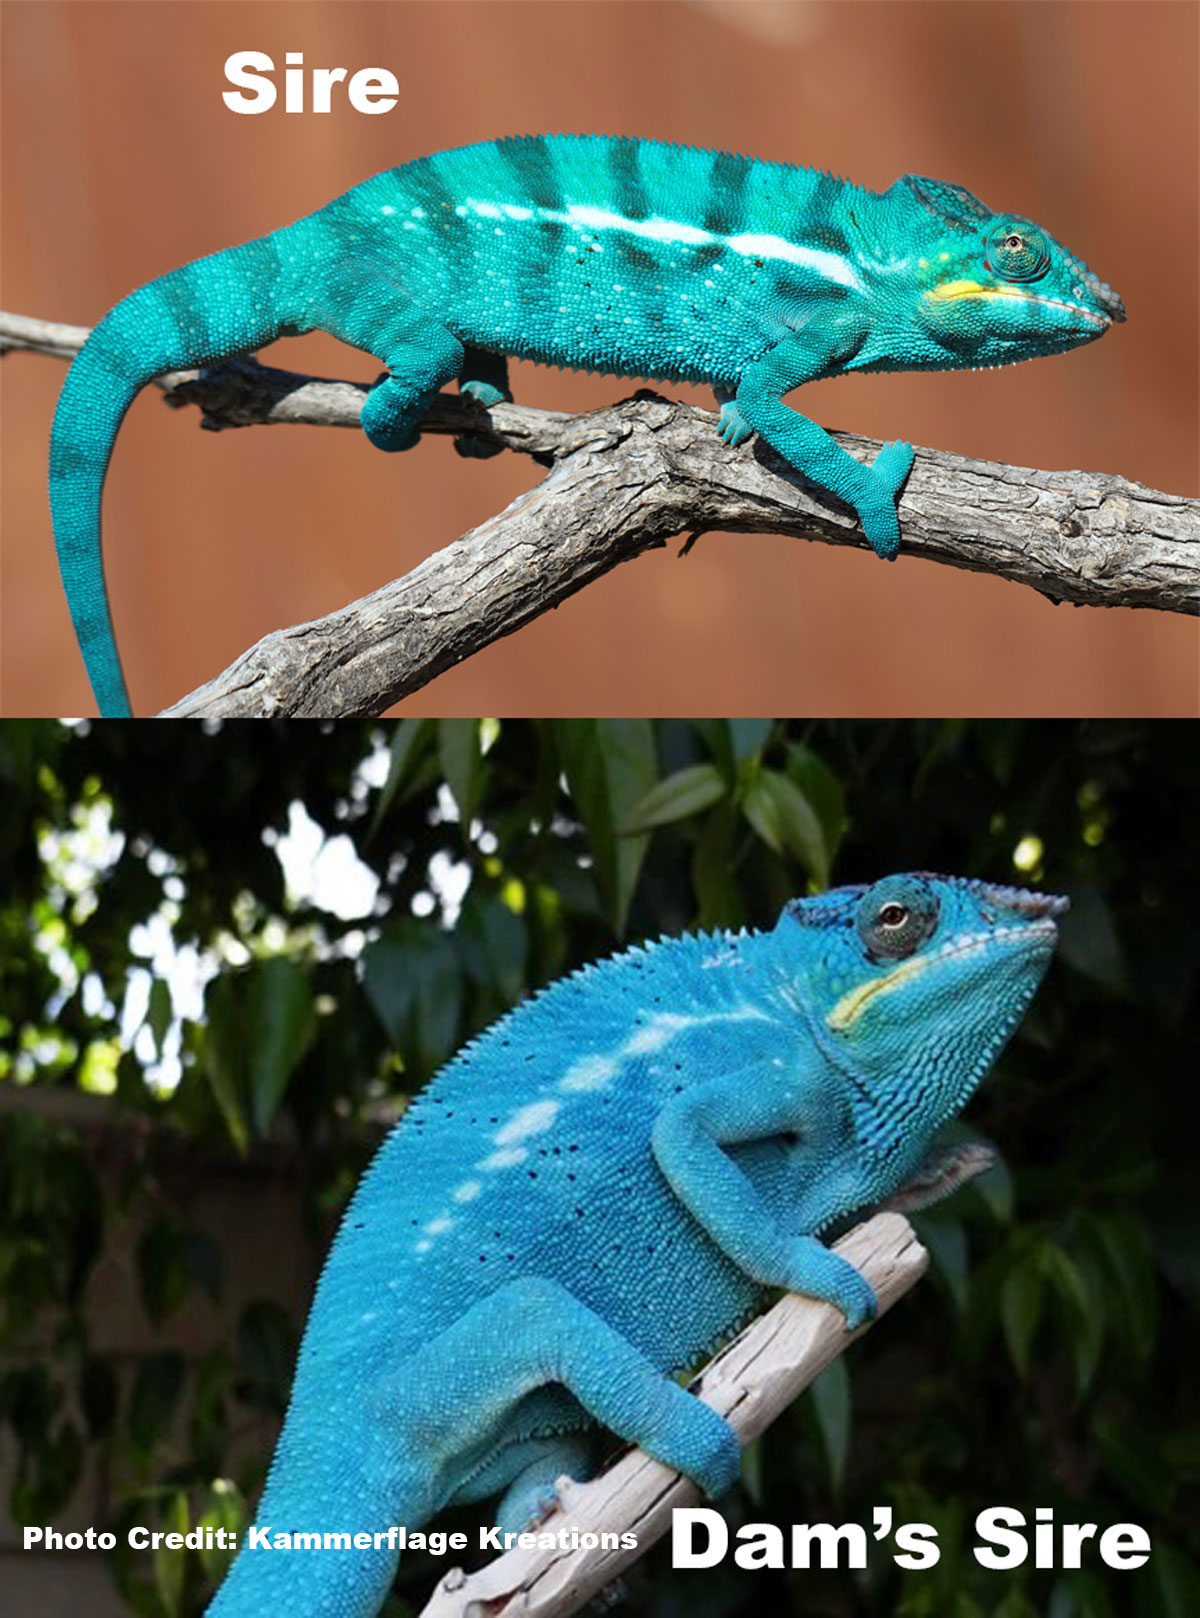 Nosy Be panther chameleon for sale